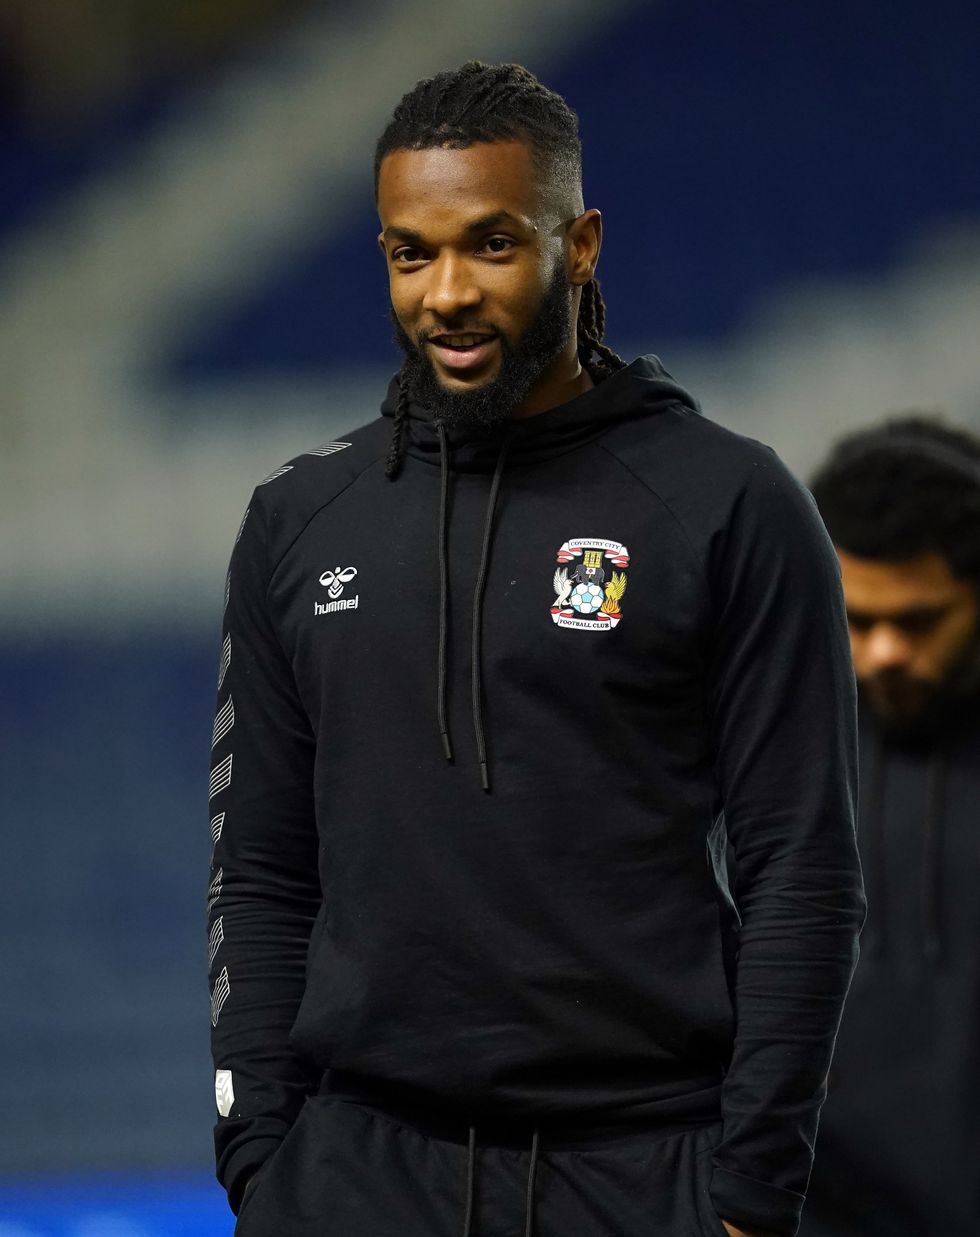 Young Sheffield Wednesday fan praised for Kasey Palmer gift after racism claim